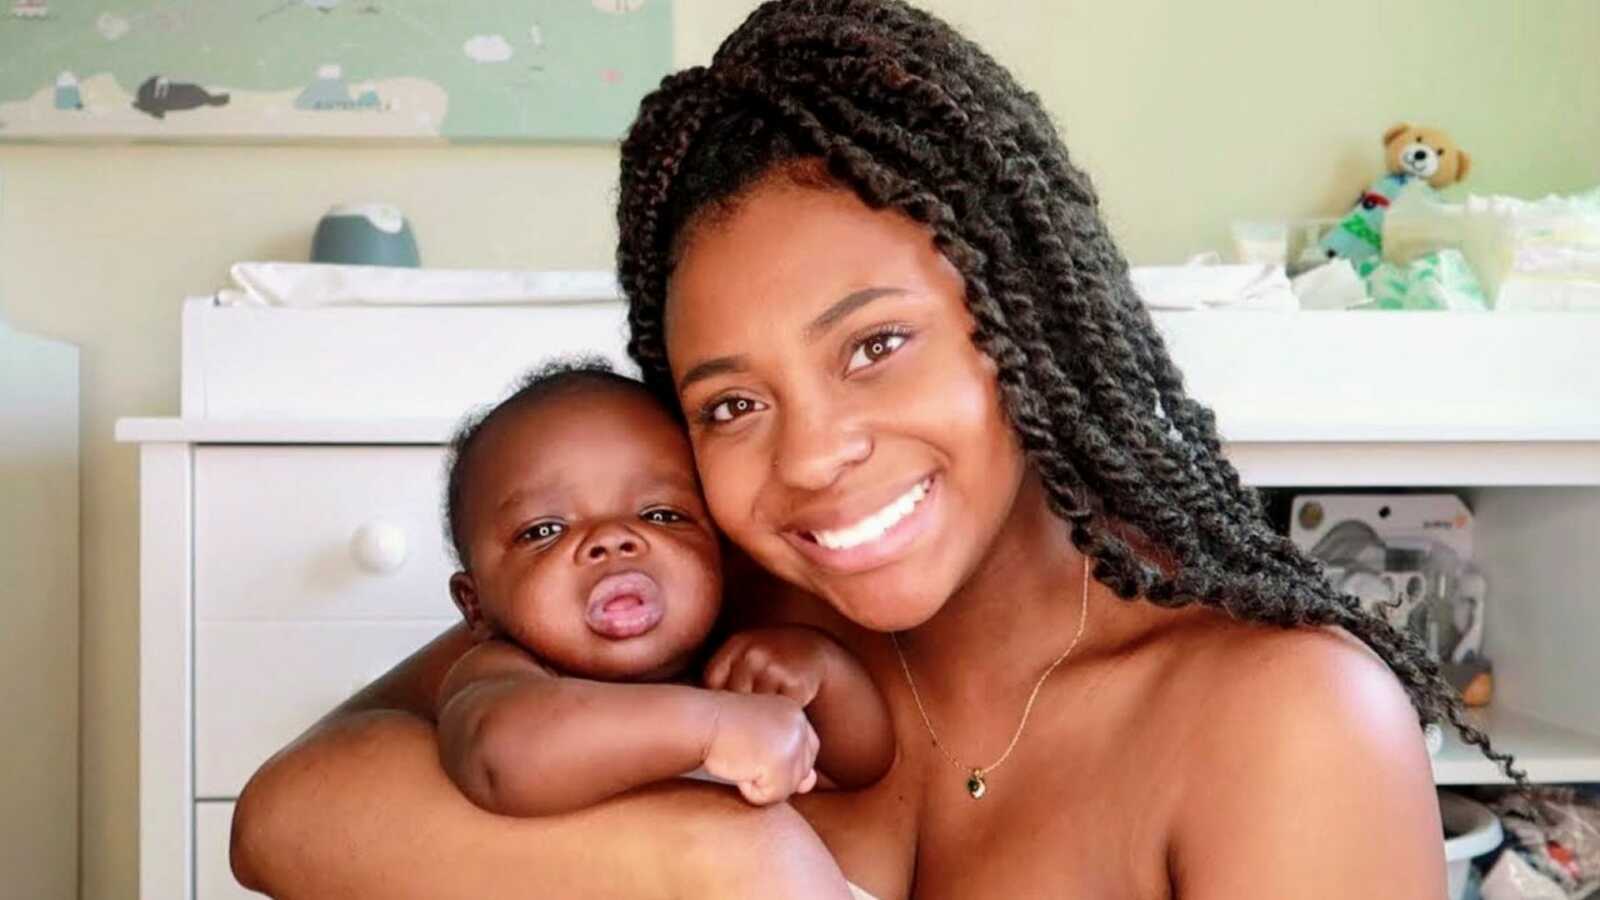 Young single mom takes a photo with her newborn son while they spend quality time together in his nursery